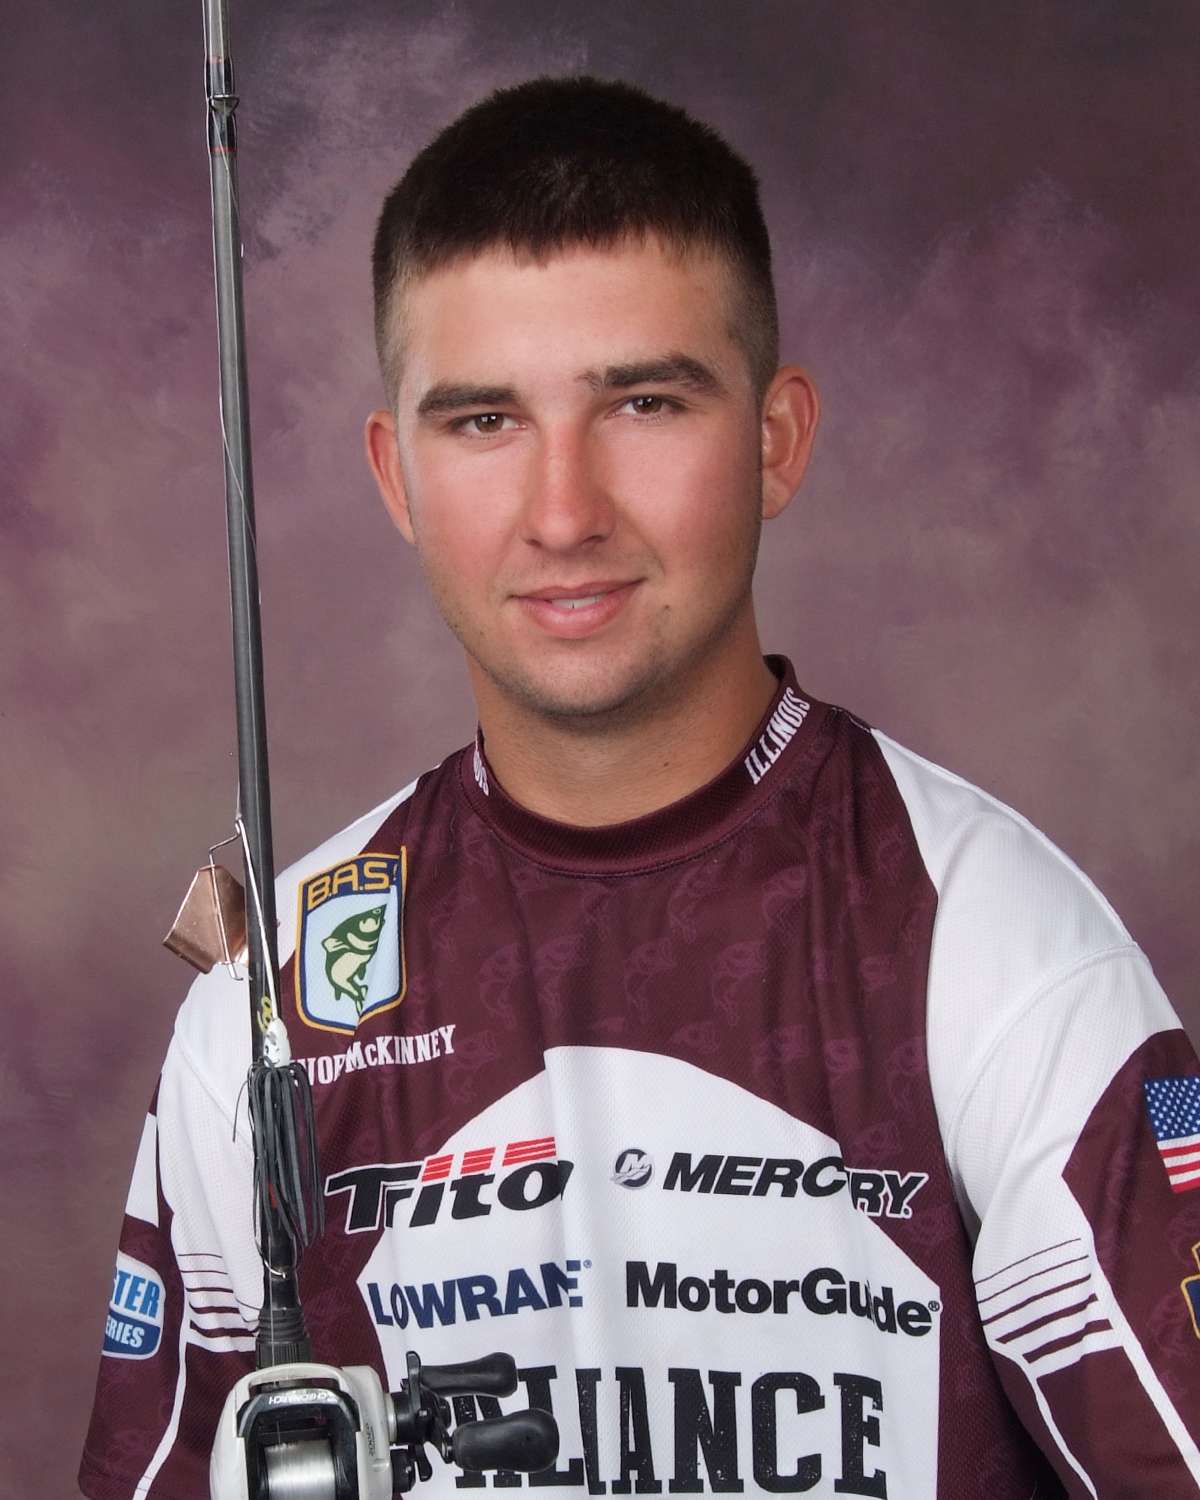 <b>Trevor McKinney, Benton, Ill.</b><br>
A senior on the Benton High School fishing team, McKinney has tallied an impressive five wins in the past 12 months, including the Bassmaster State qualifier, as well as a 99-team event this past May. McKinney also chalked up five other Top 10 finishes, including a second place showing at The Bass Federation State Championship. Perhaps even more impressive, this senior is his high schoolÃ¢ÂÂs valedictorian (graduating with a 5.25 GPA) and an active member of the National Honor Society. McKinney has already earned several college scholarships, including a $10,000 Presidential scholarship and $5,000 leadership scholarship.